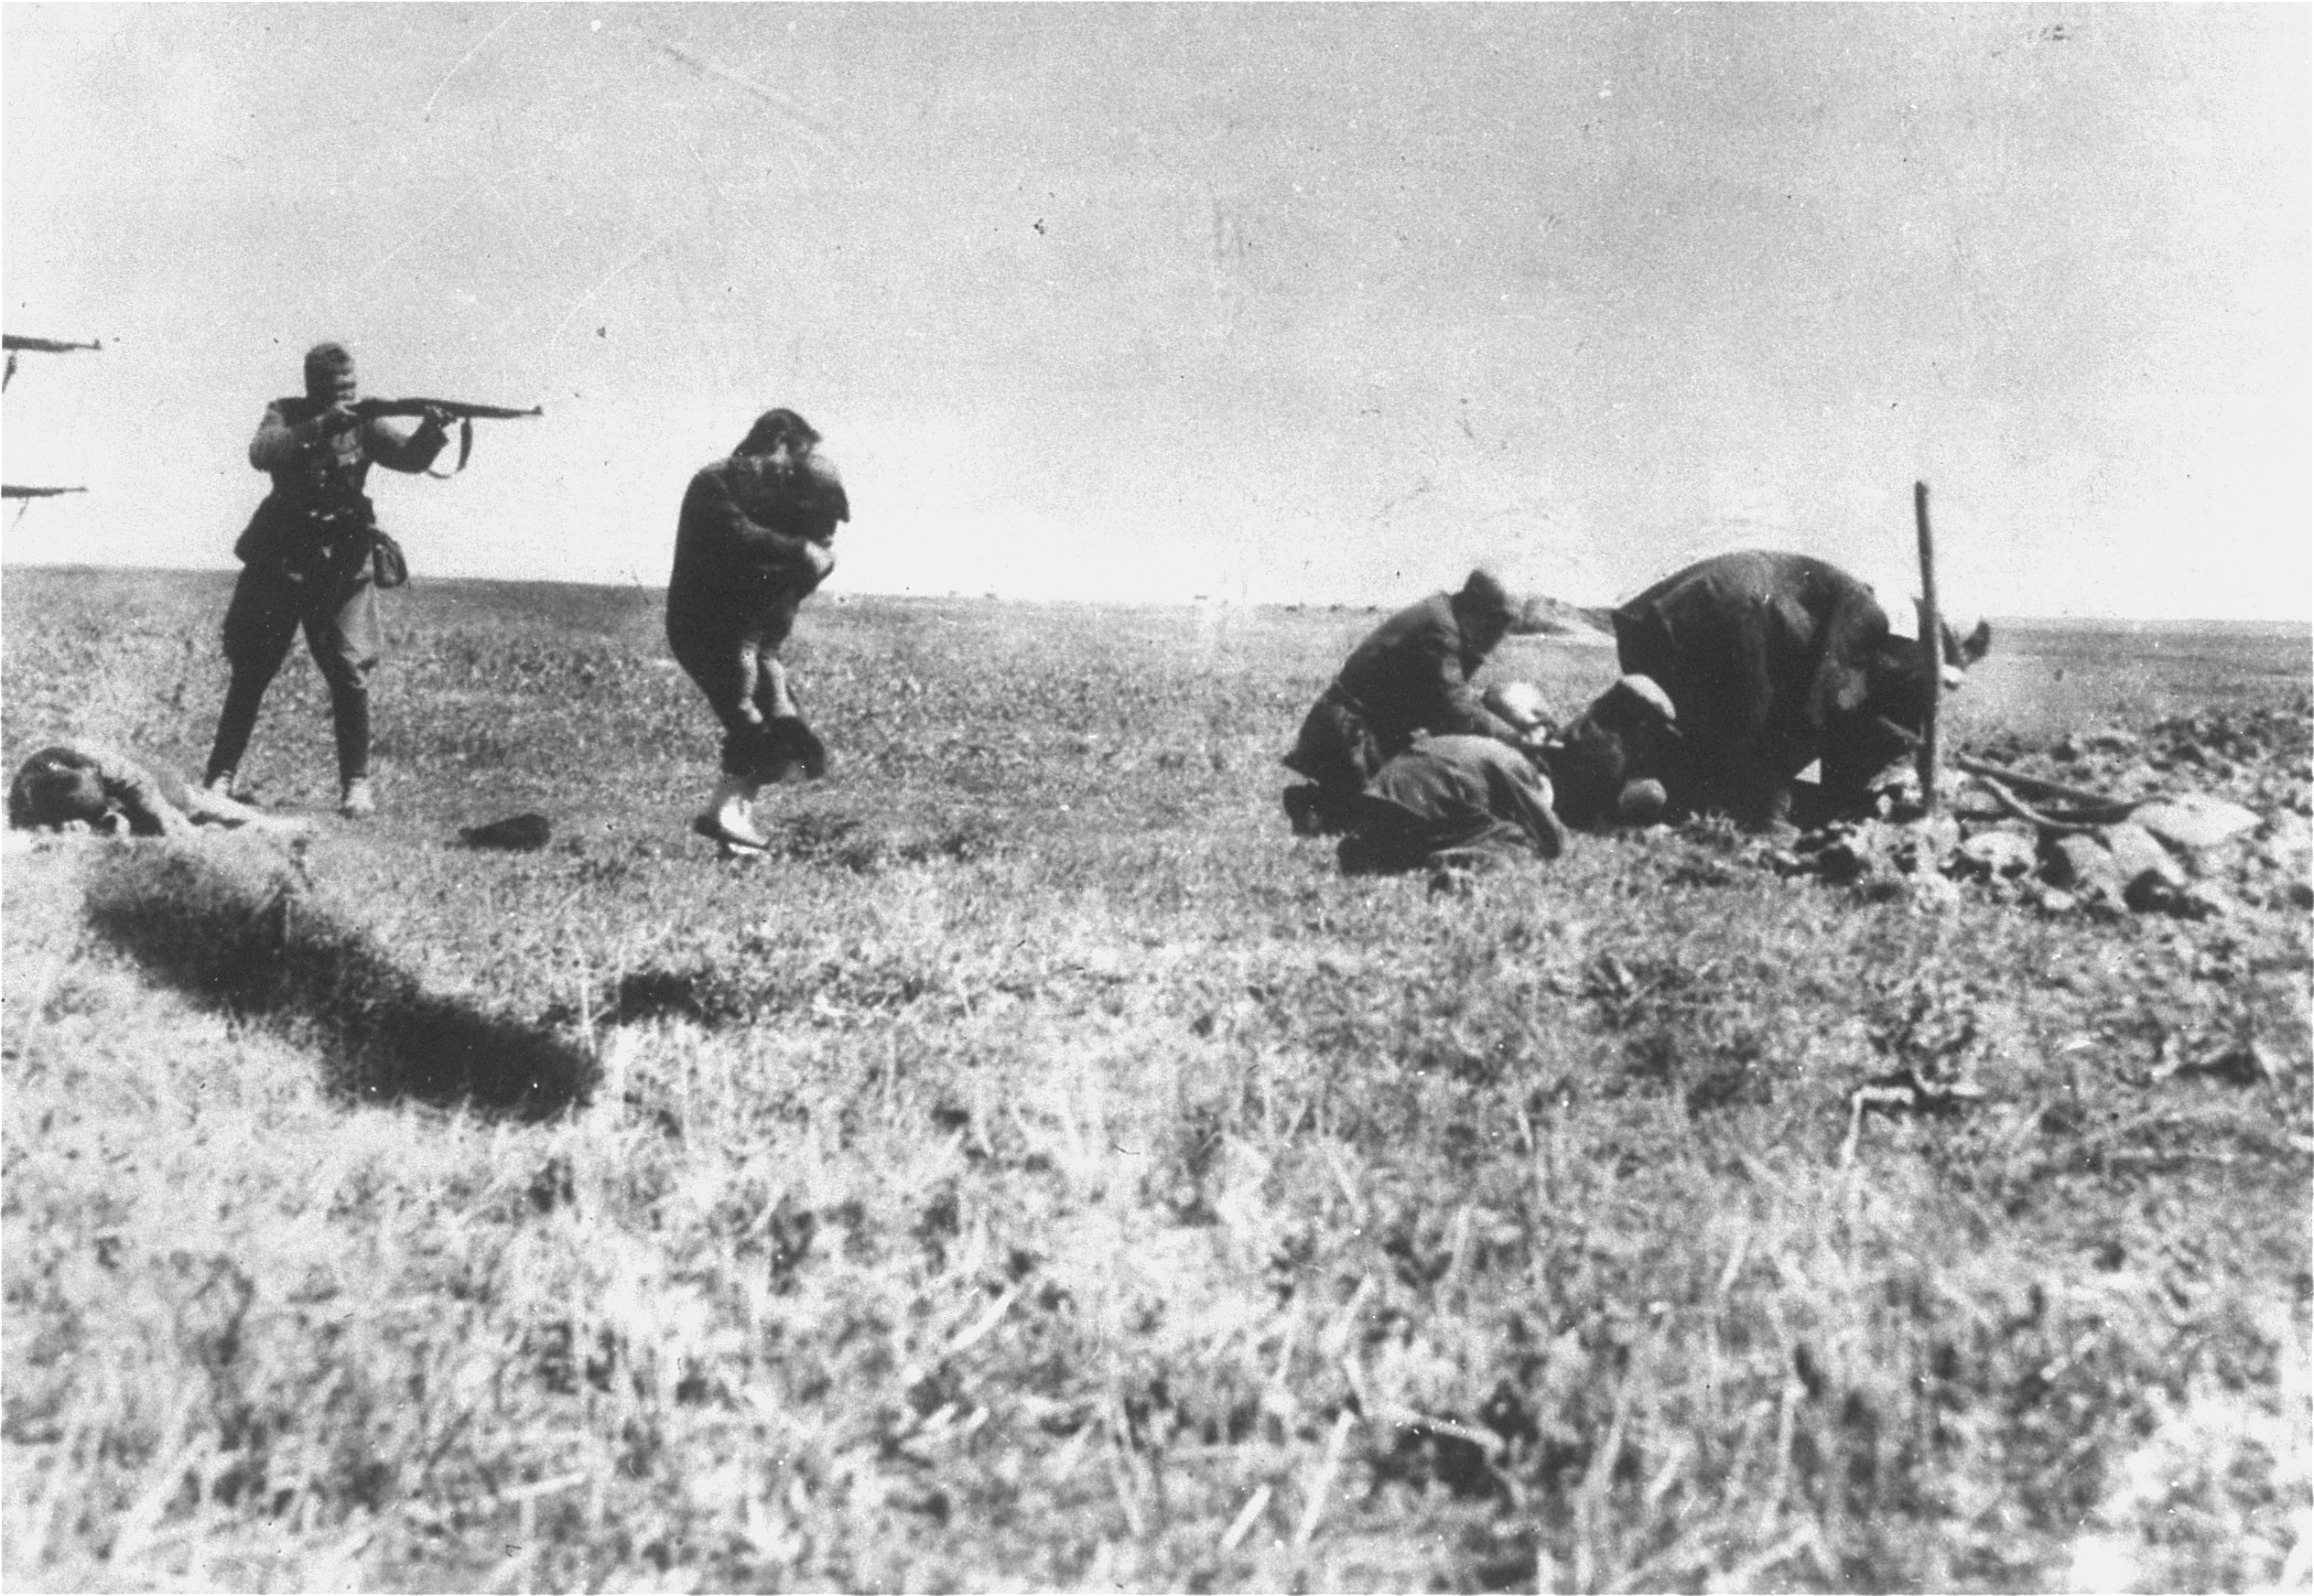 A German policeman aiming his rifle at a Jewish woman and her child. Ivangorod